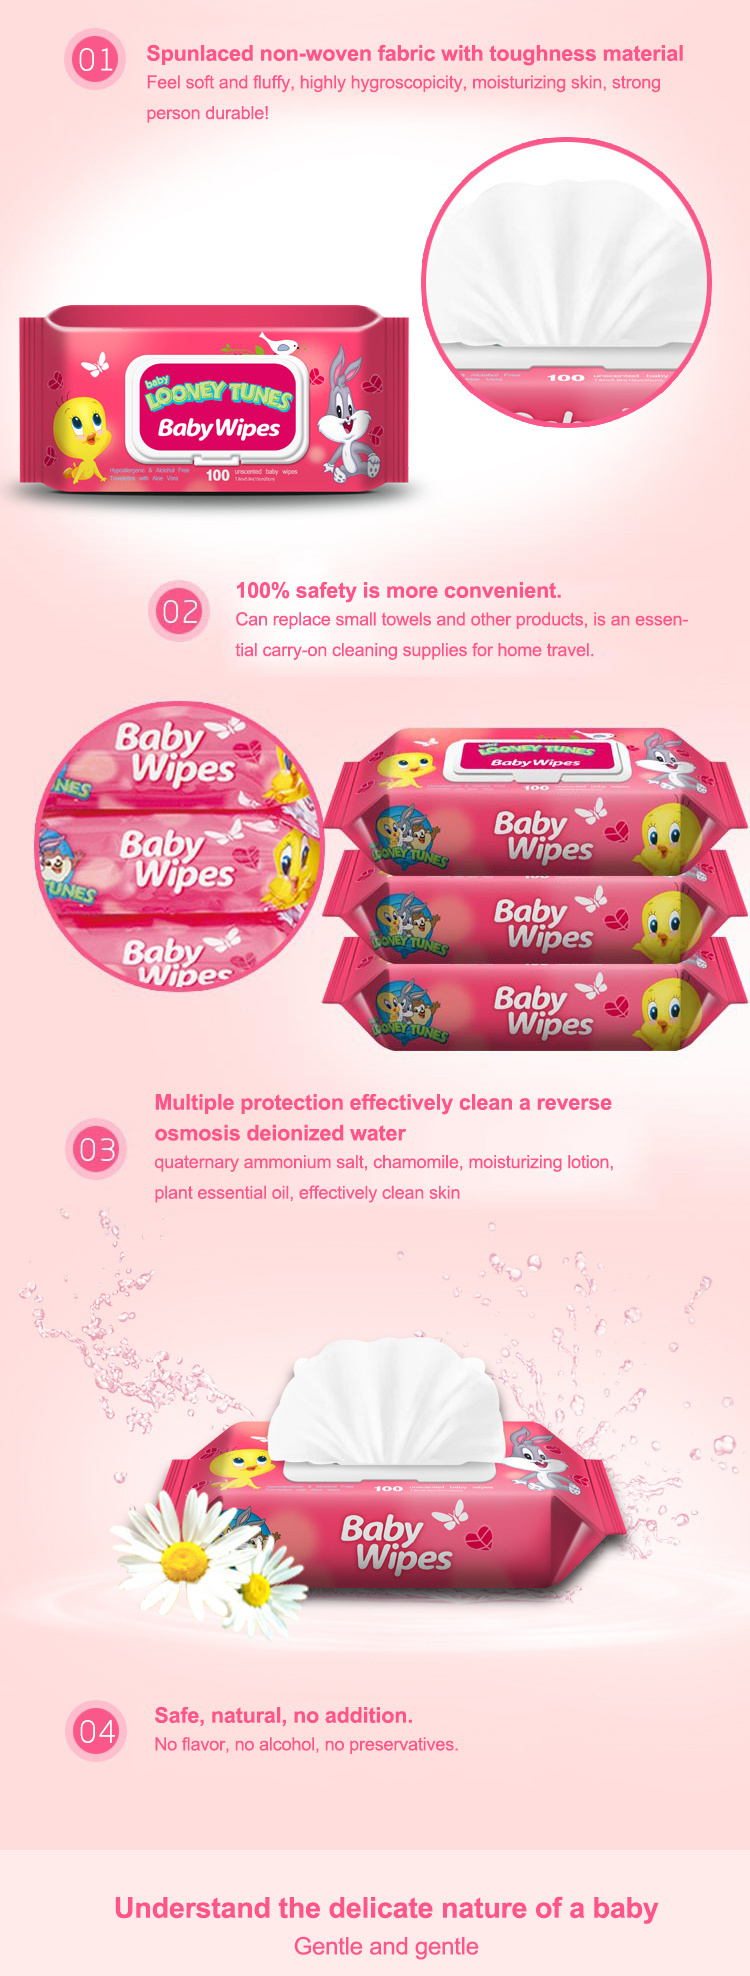 Baby Wipes Bulk Baby Wipes Best Baby Wipes Good for Cleaning Baby Wipes Box Cover Baby Wipes for Face